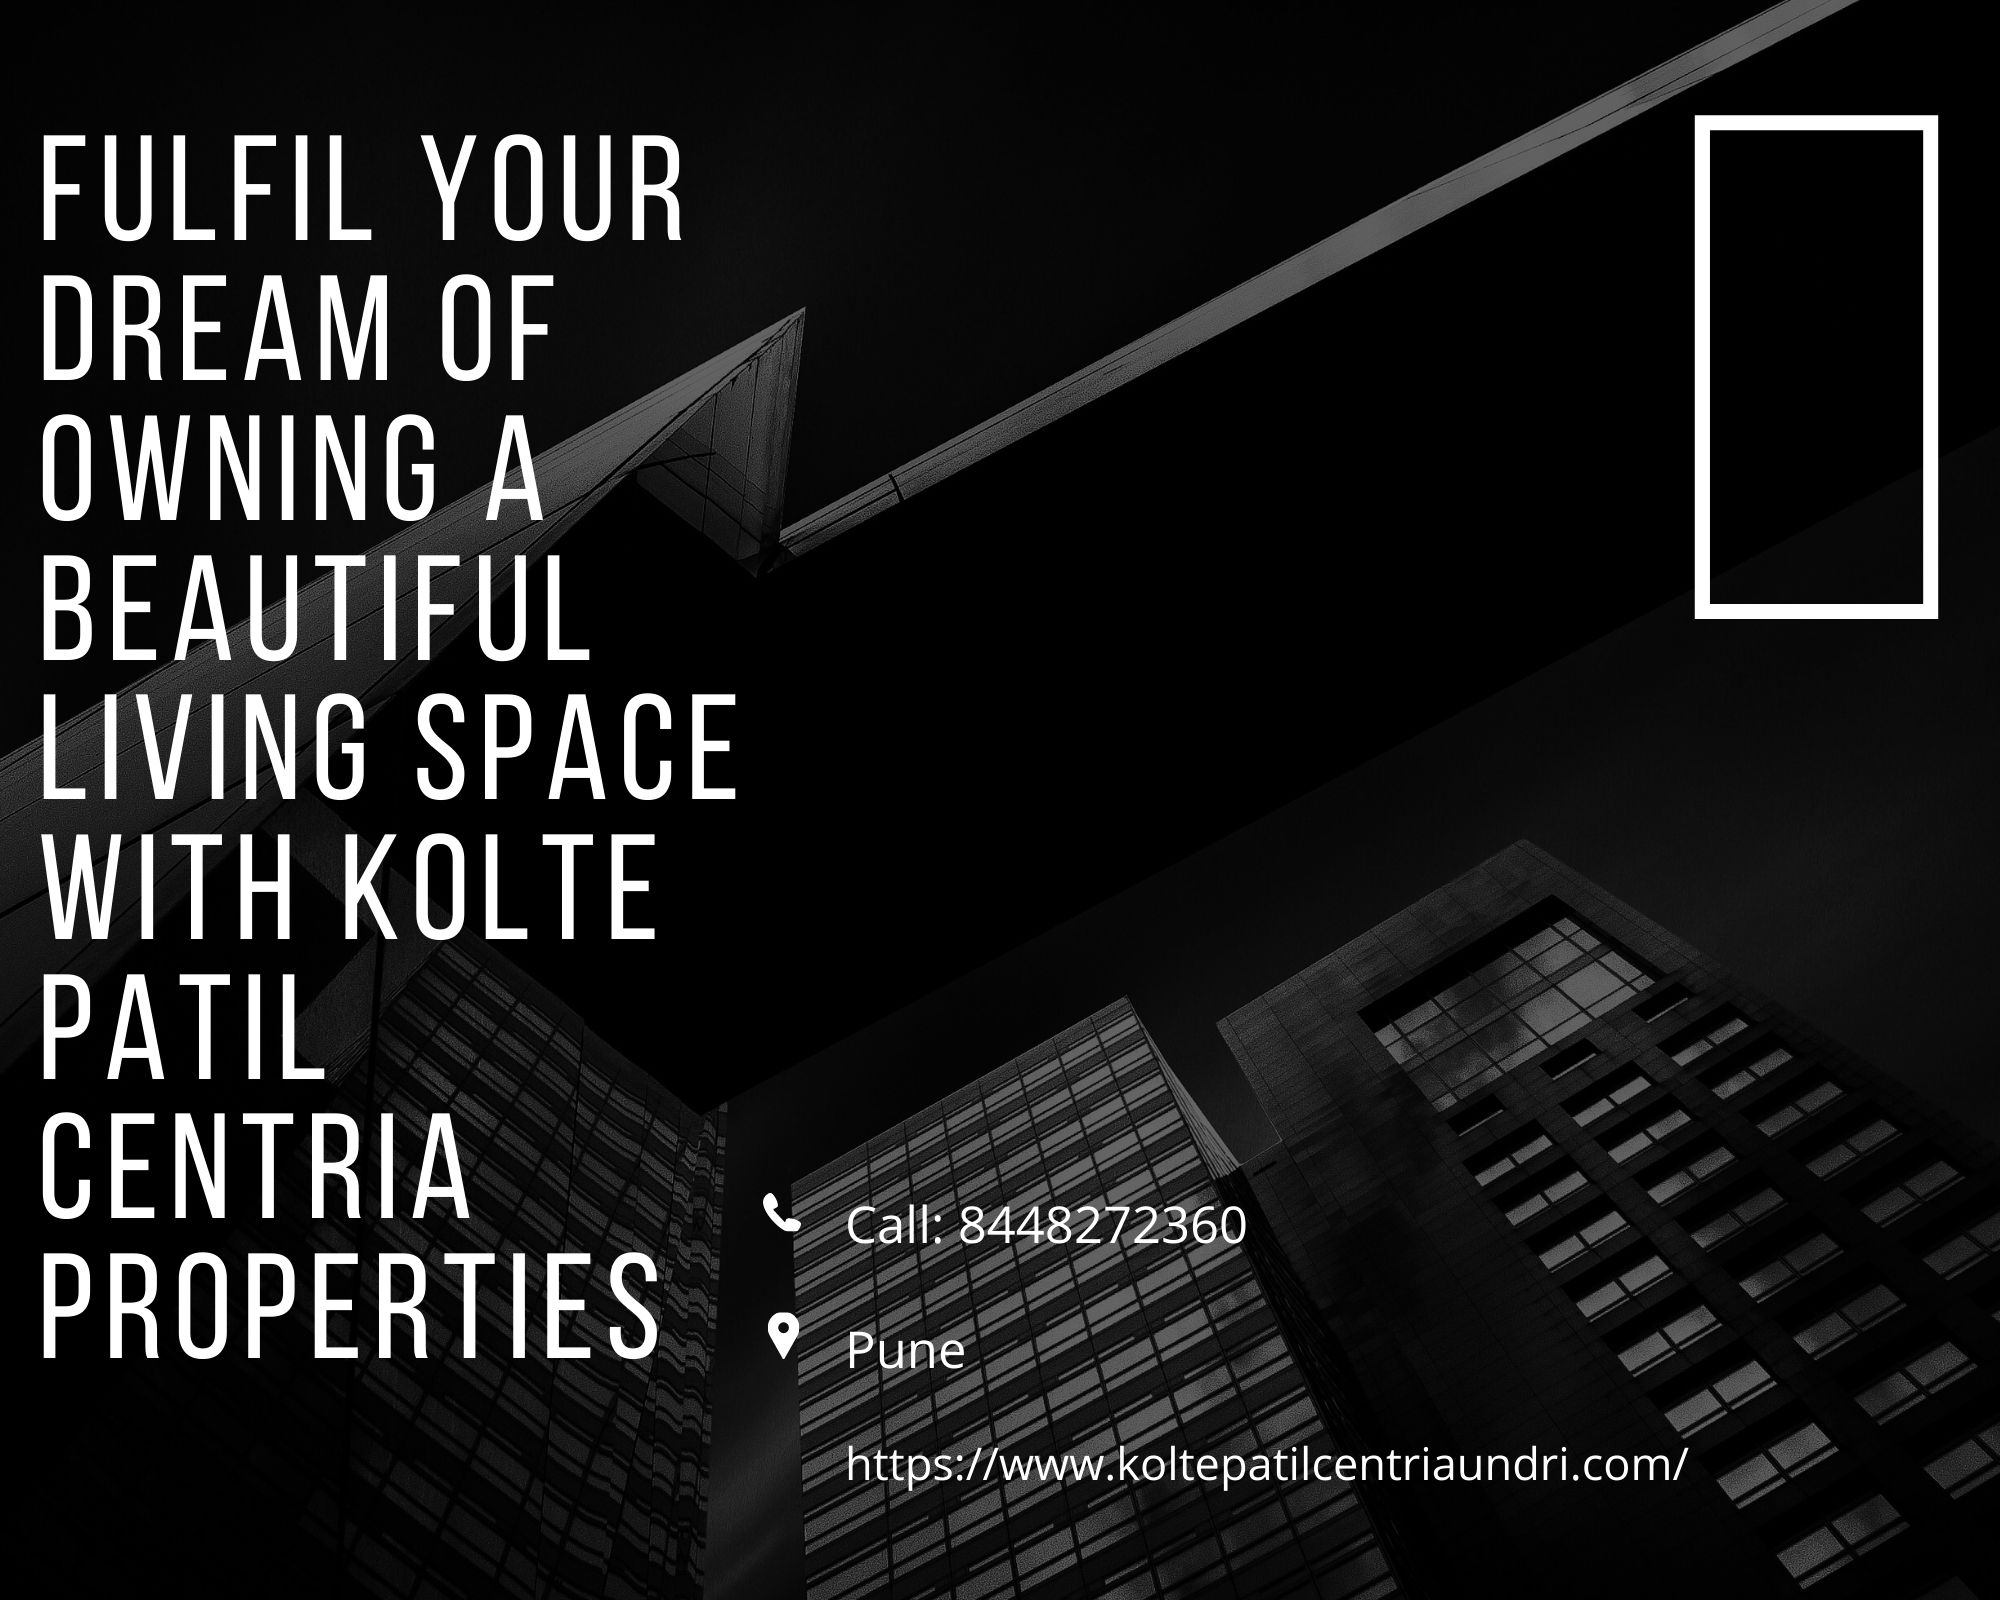 Fulfil Your Dream Of Owning A Beautiful Living Space With Kolte Patil Centria Properties